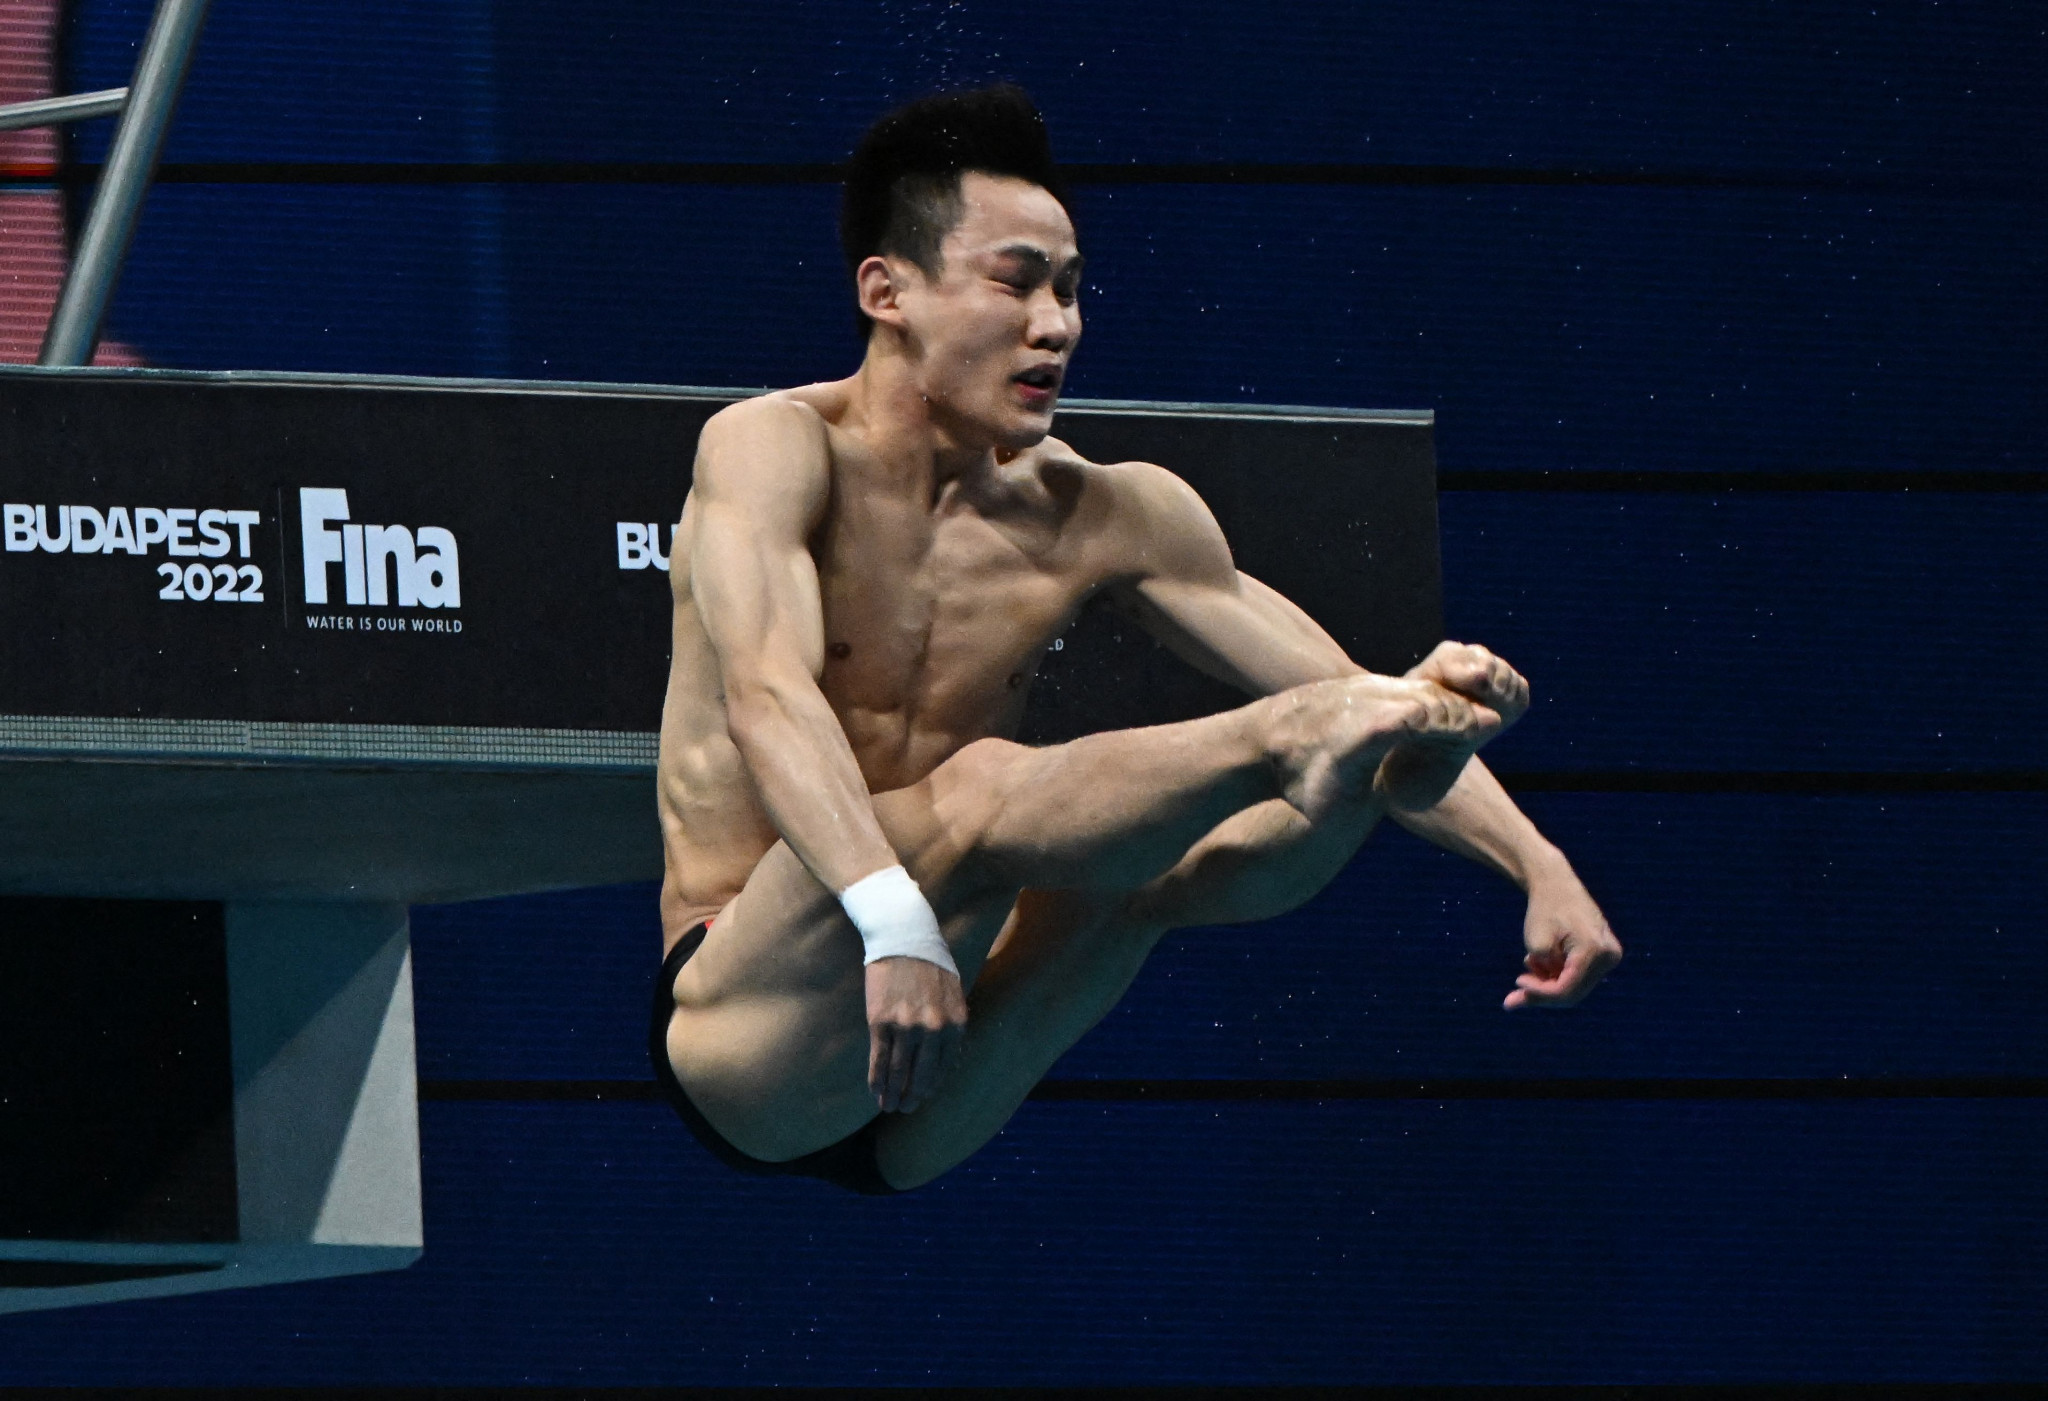 Yang Hao topped the scoring in the men's 10m platform semi-final to put China on course for another diving gold medal tomorrow ©Getty Images